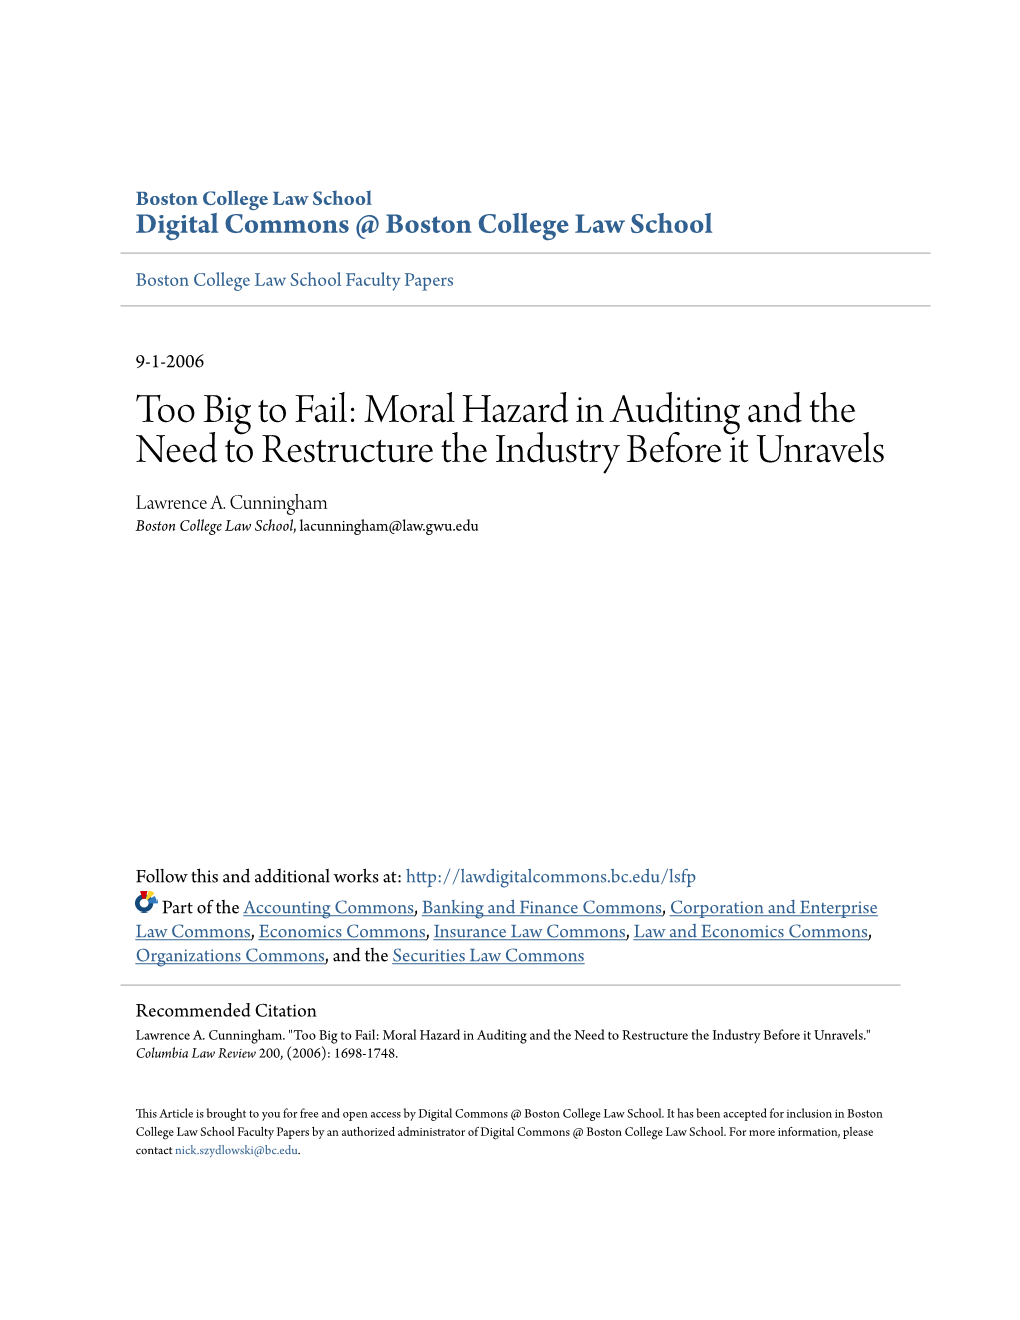 Moral Hazard in Auditing and the Need to Restructure the Industry Before It Unravels Lawrence A